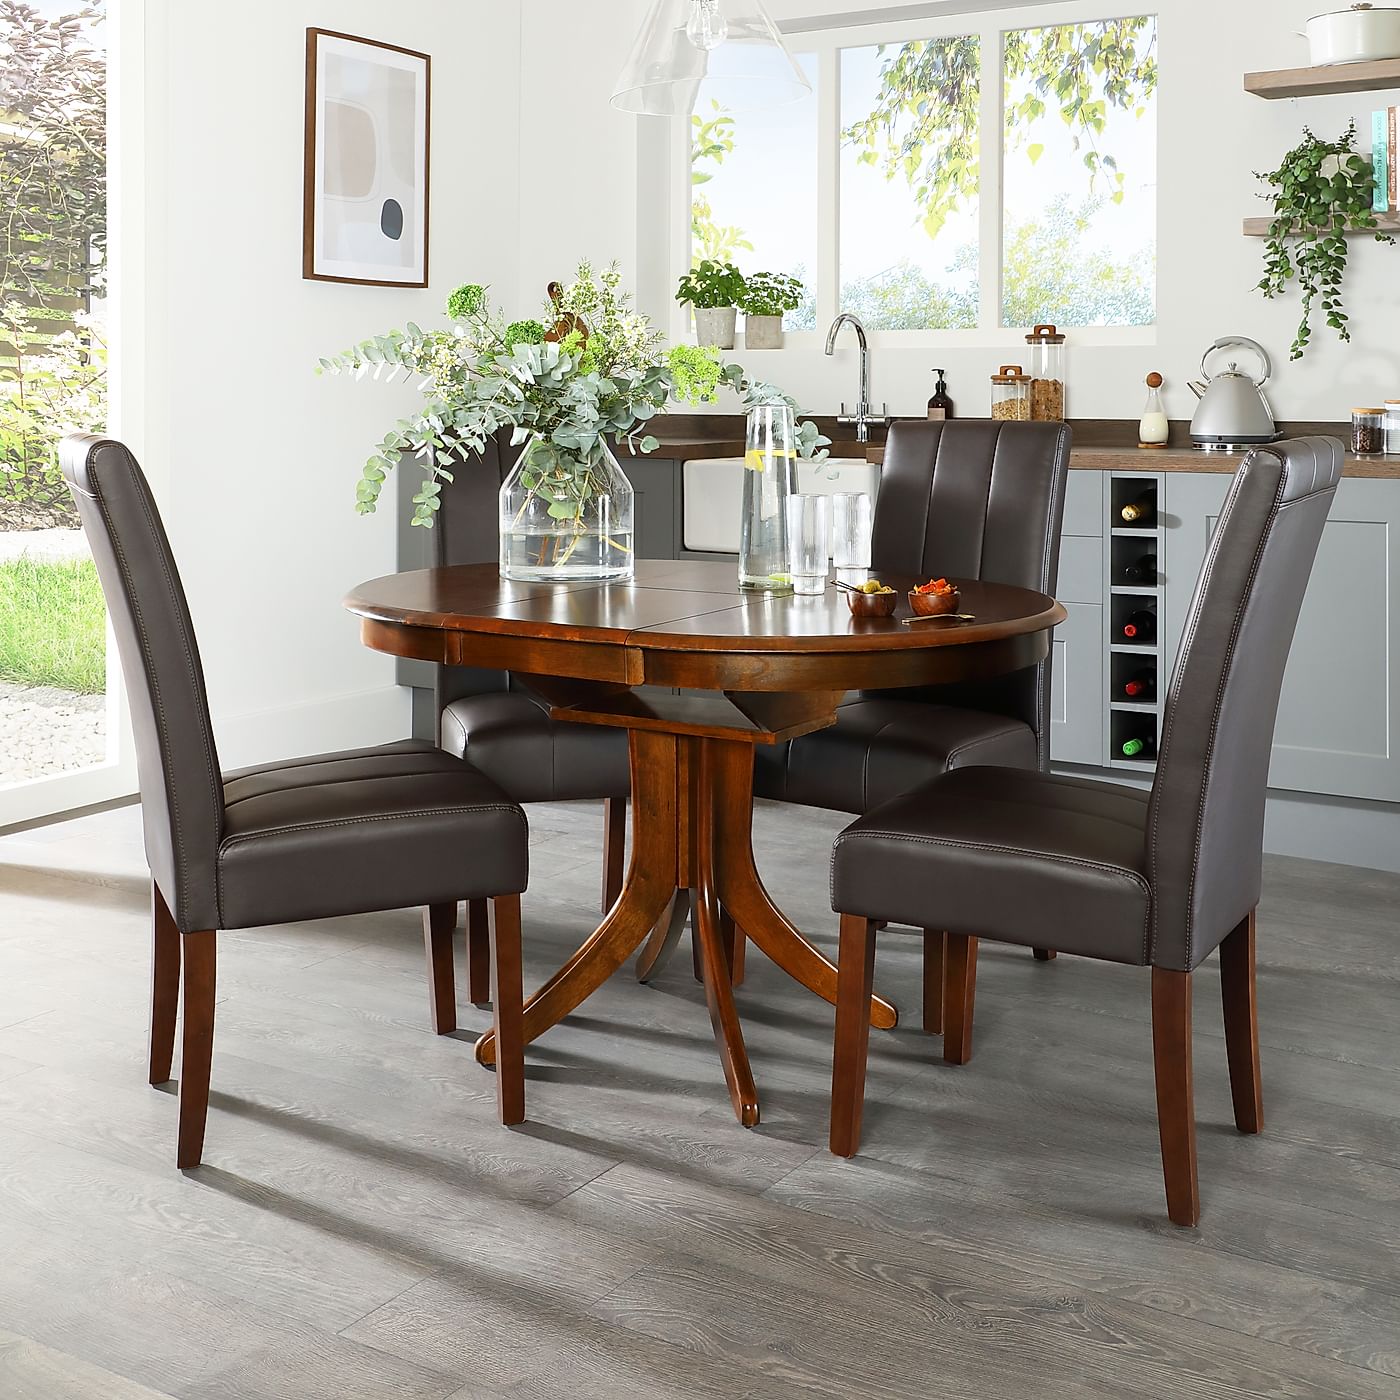 Hudson Round Dark Wood Extending Dining Table With 4 Carrick Brown